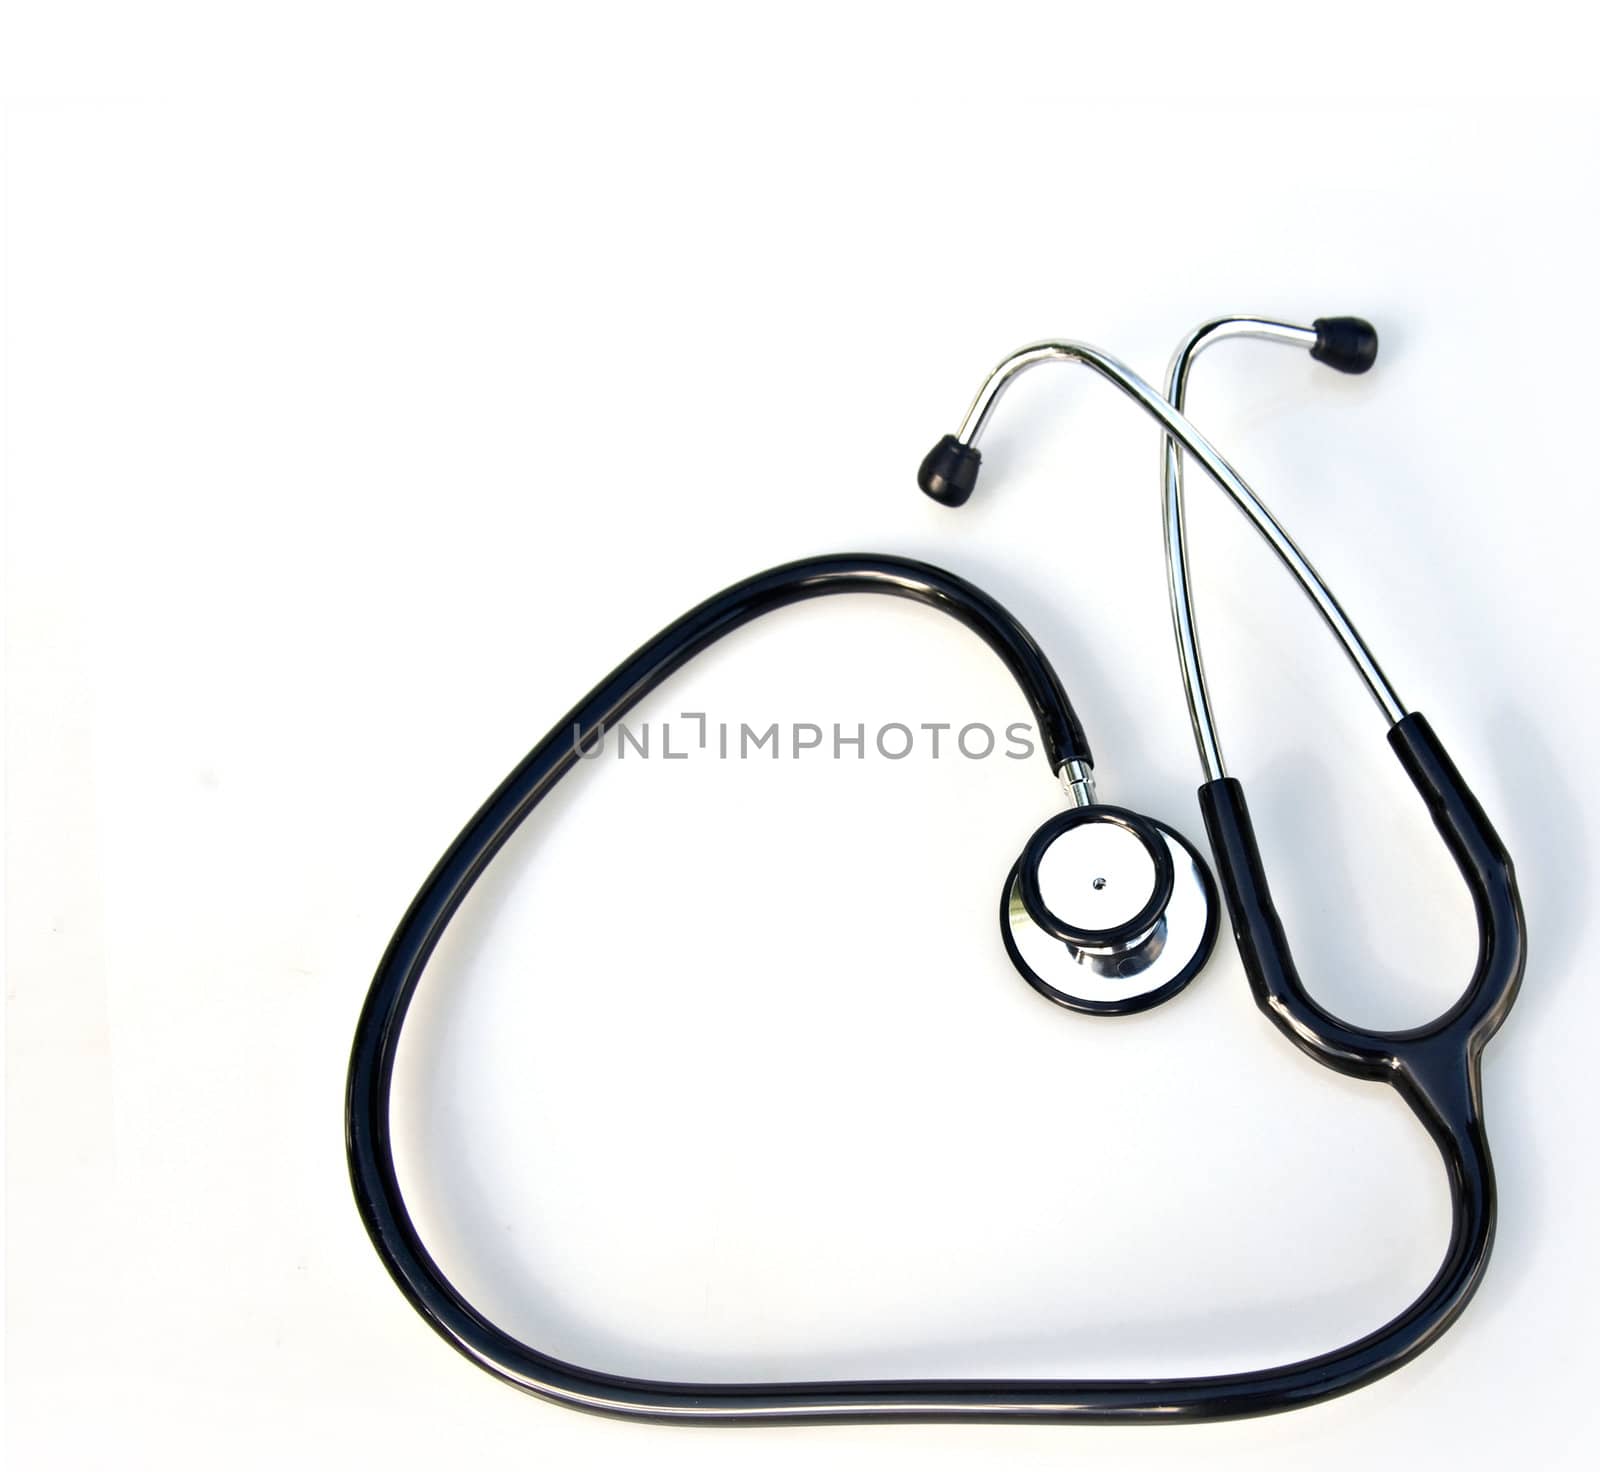 great image of a stethoscope isolated on white background